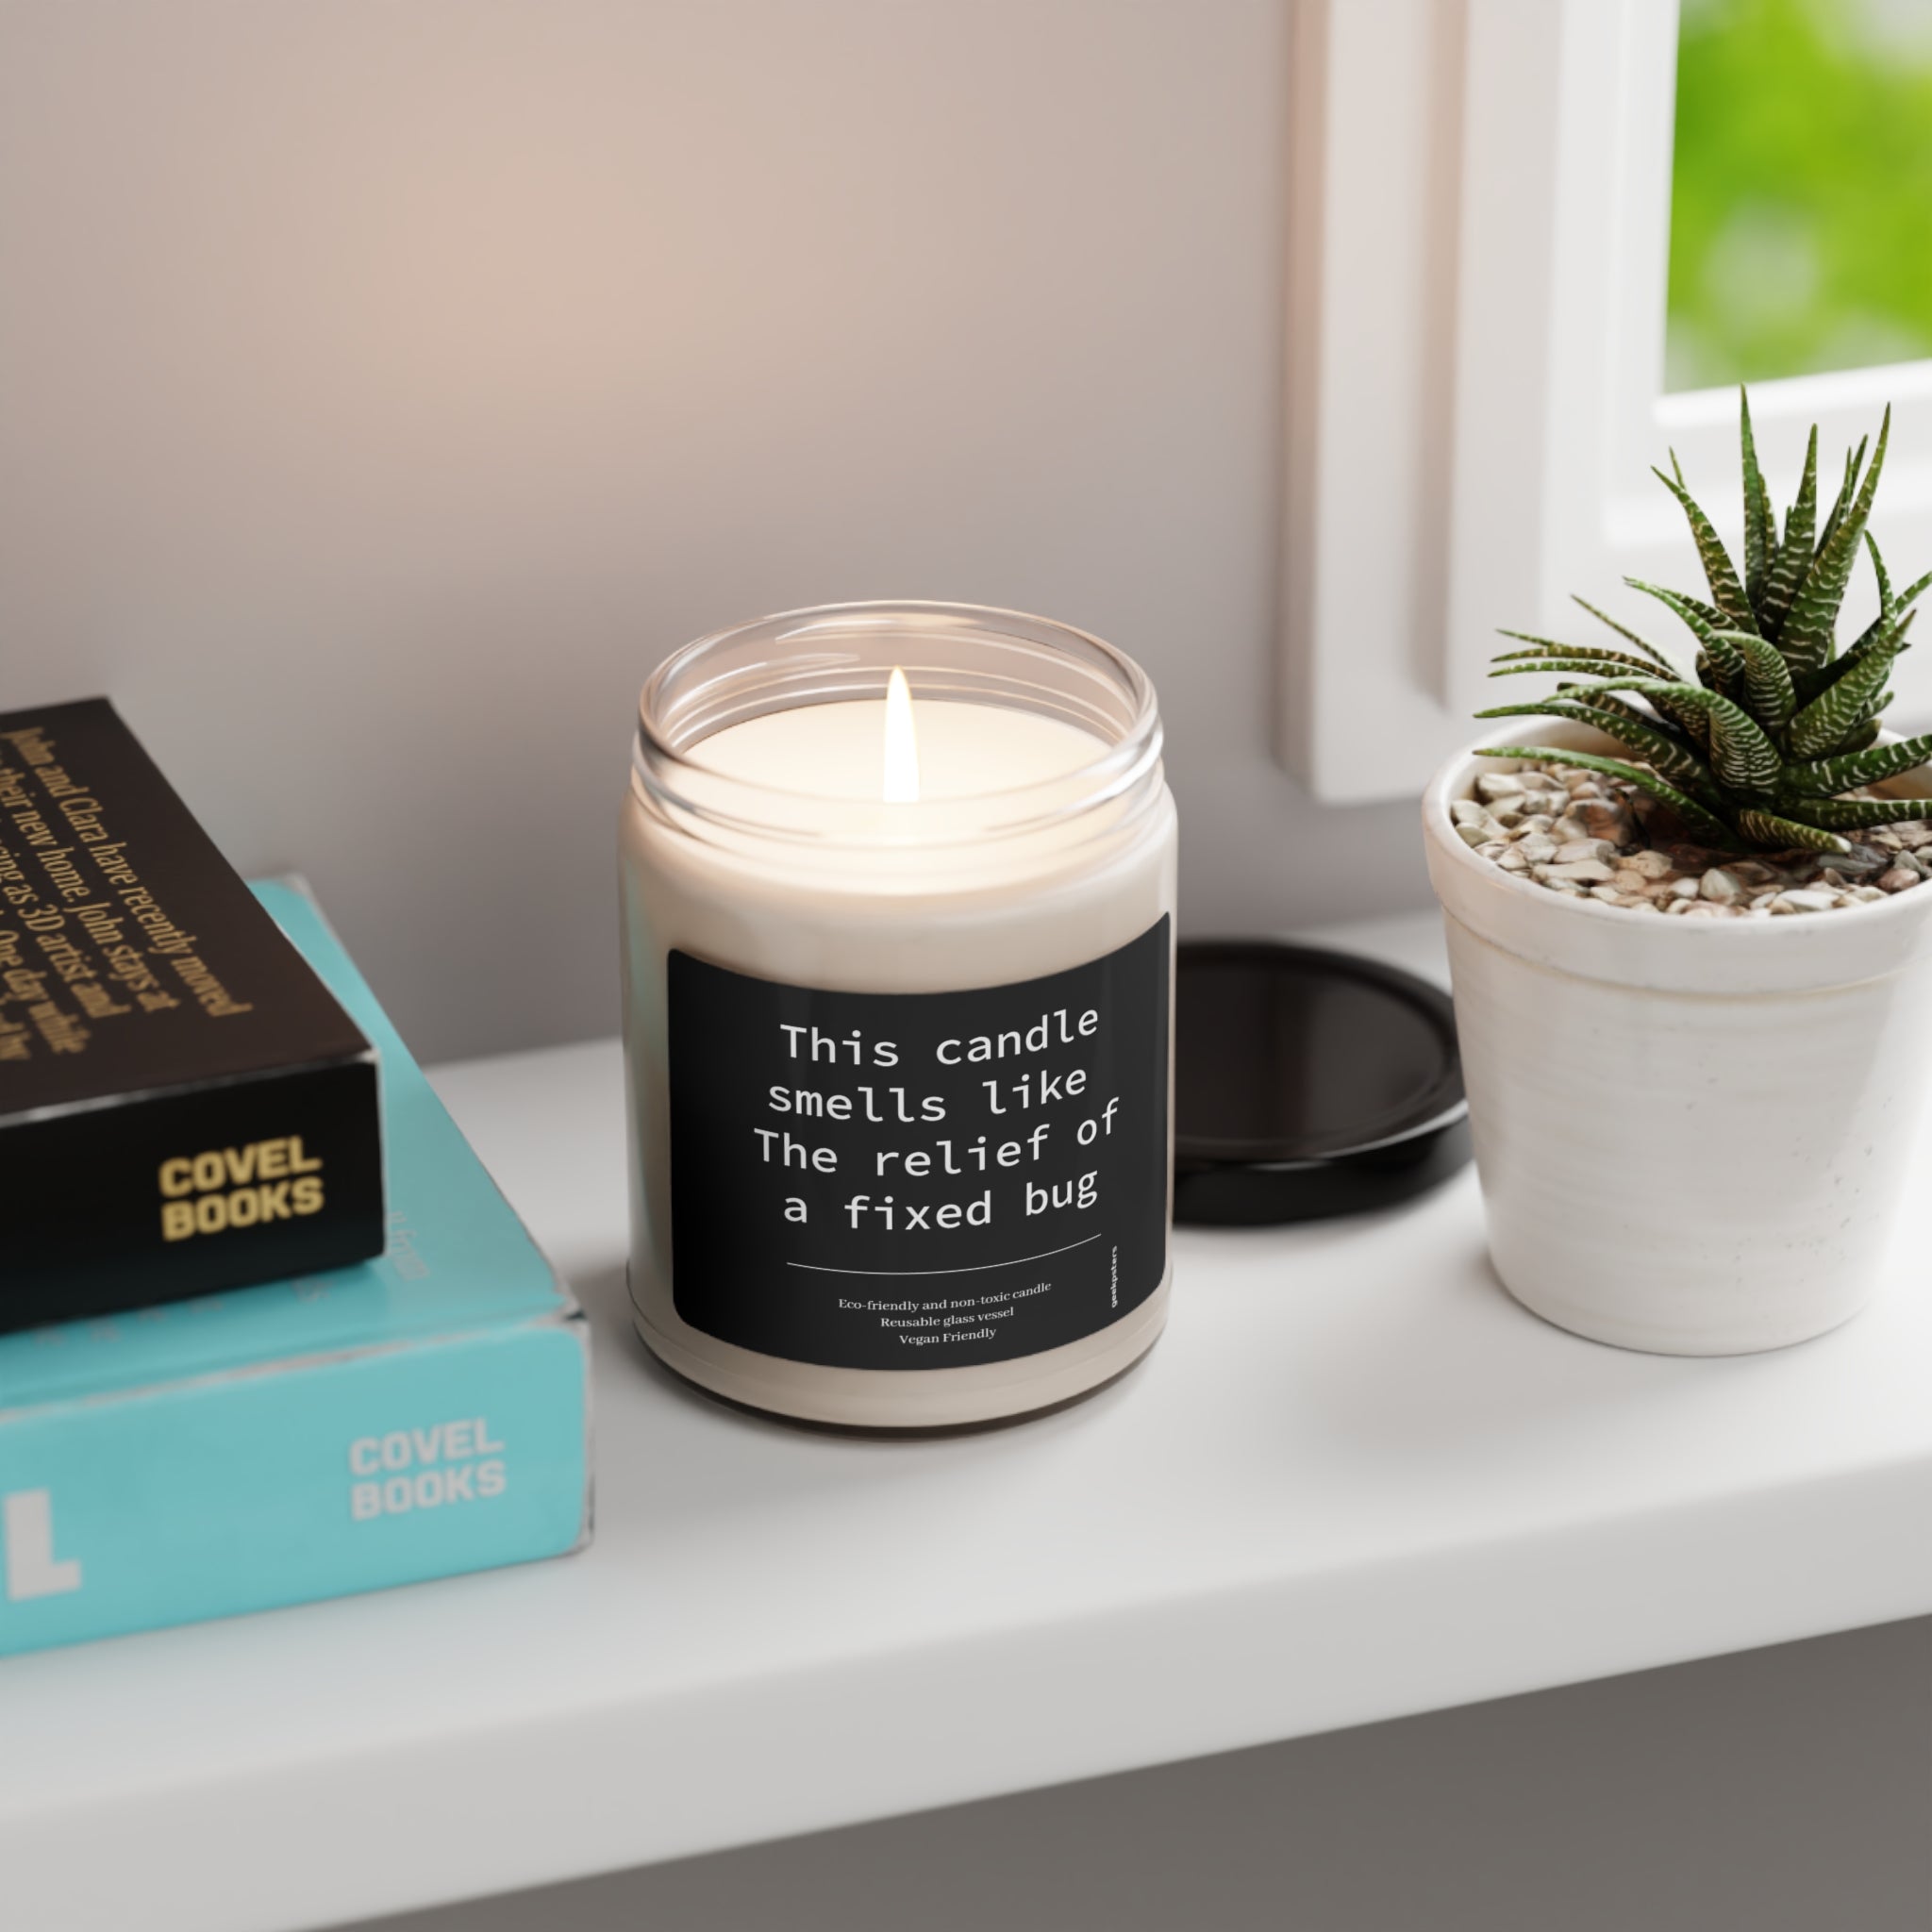 A 9oz This Candle Smells Like The Relief of a Fixed Bug - Scented Soy Candle labeled "this candle smells like the relief of a fixed bug" on a windowsill beside books and a potted succulent.